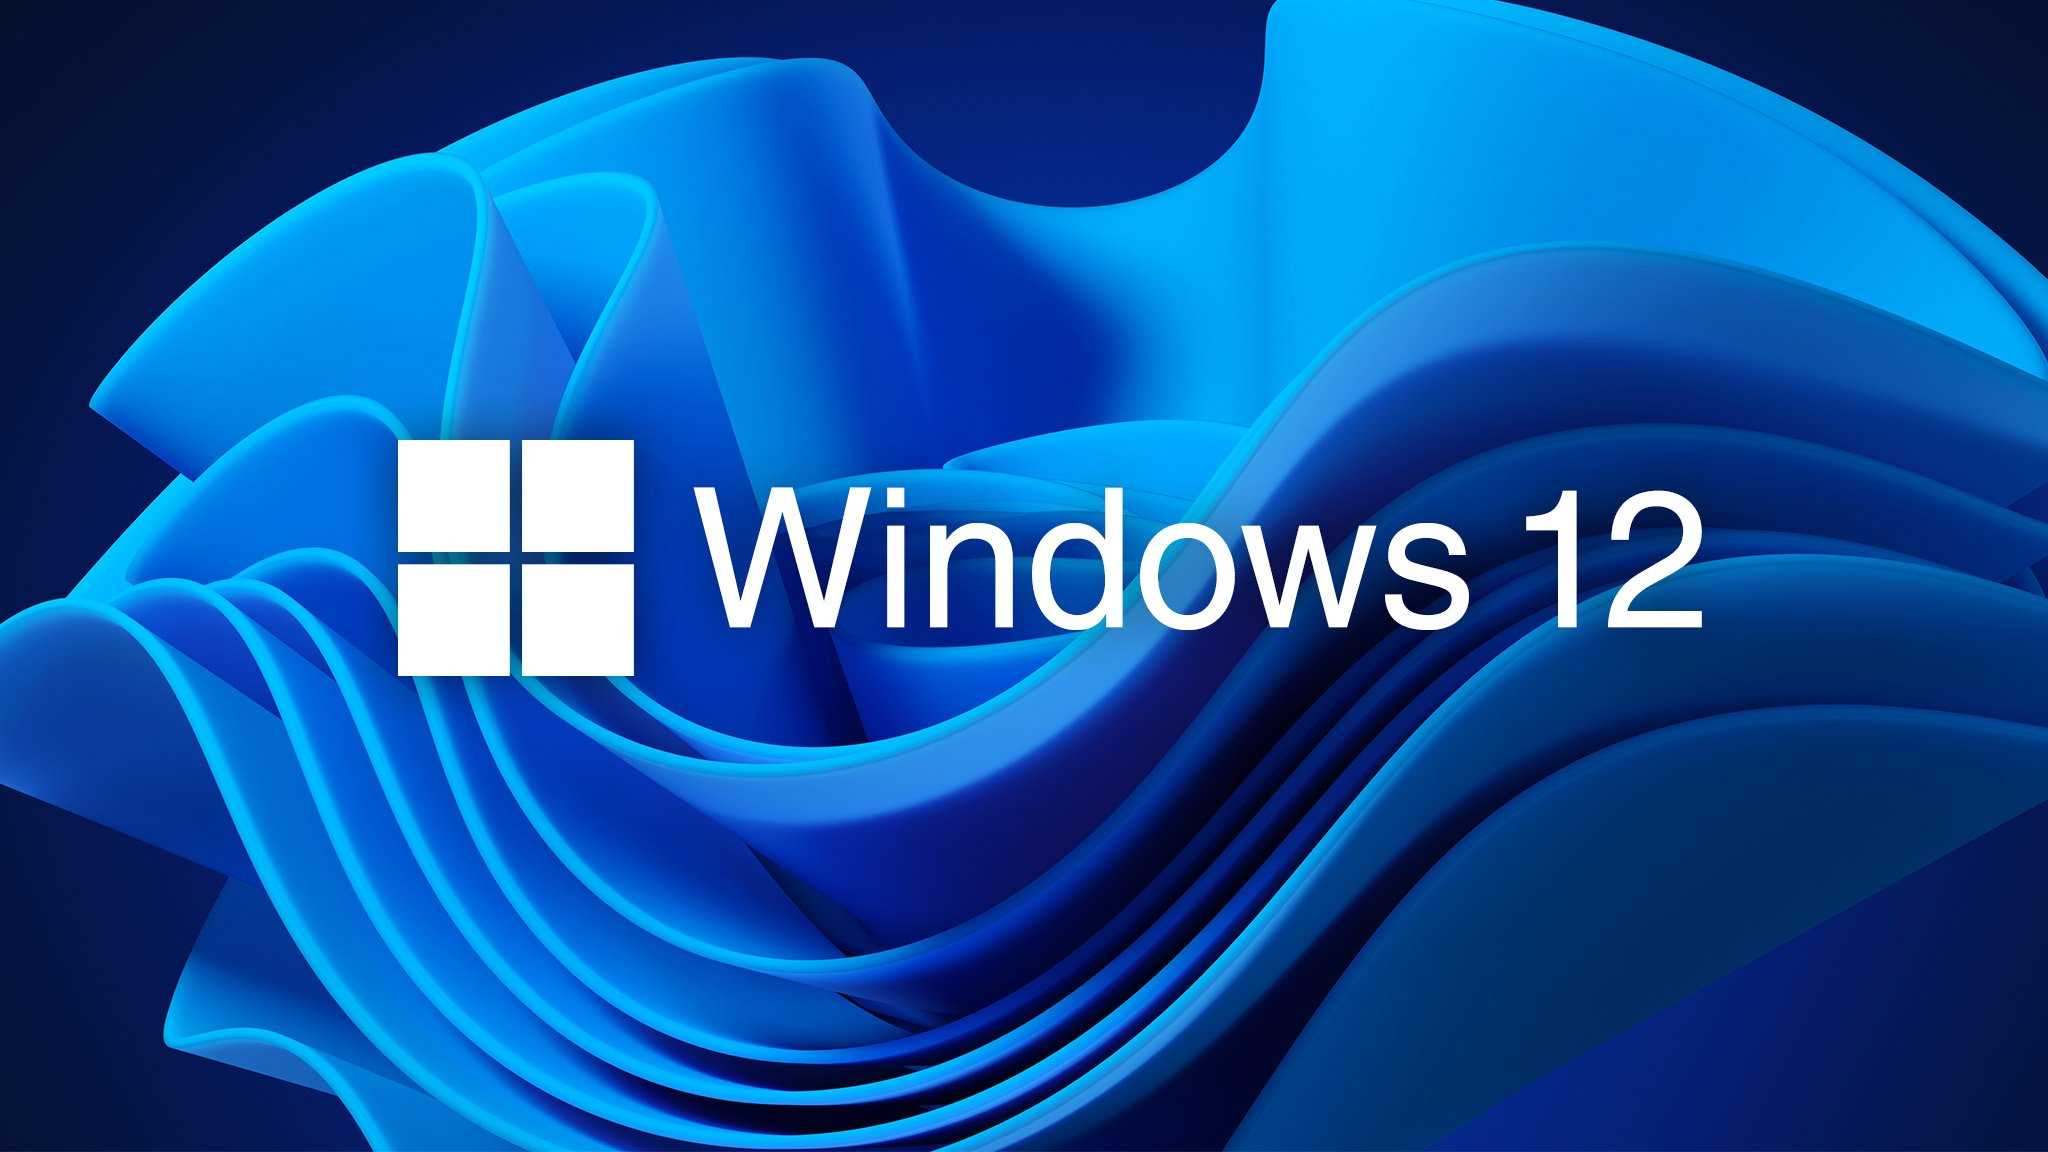 Windows-12-New-operating-system-already-in-the-works